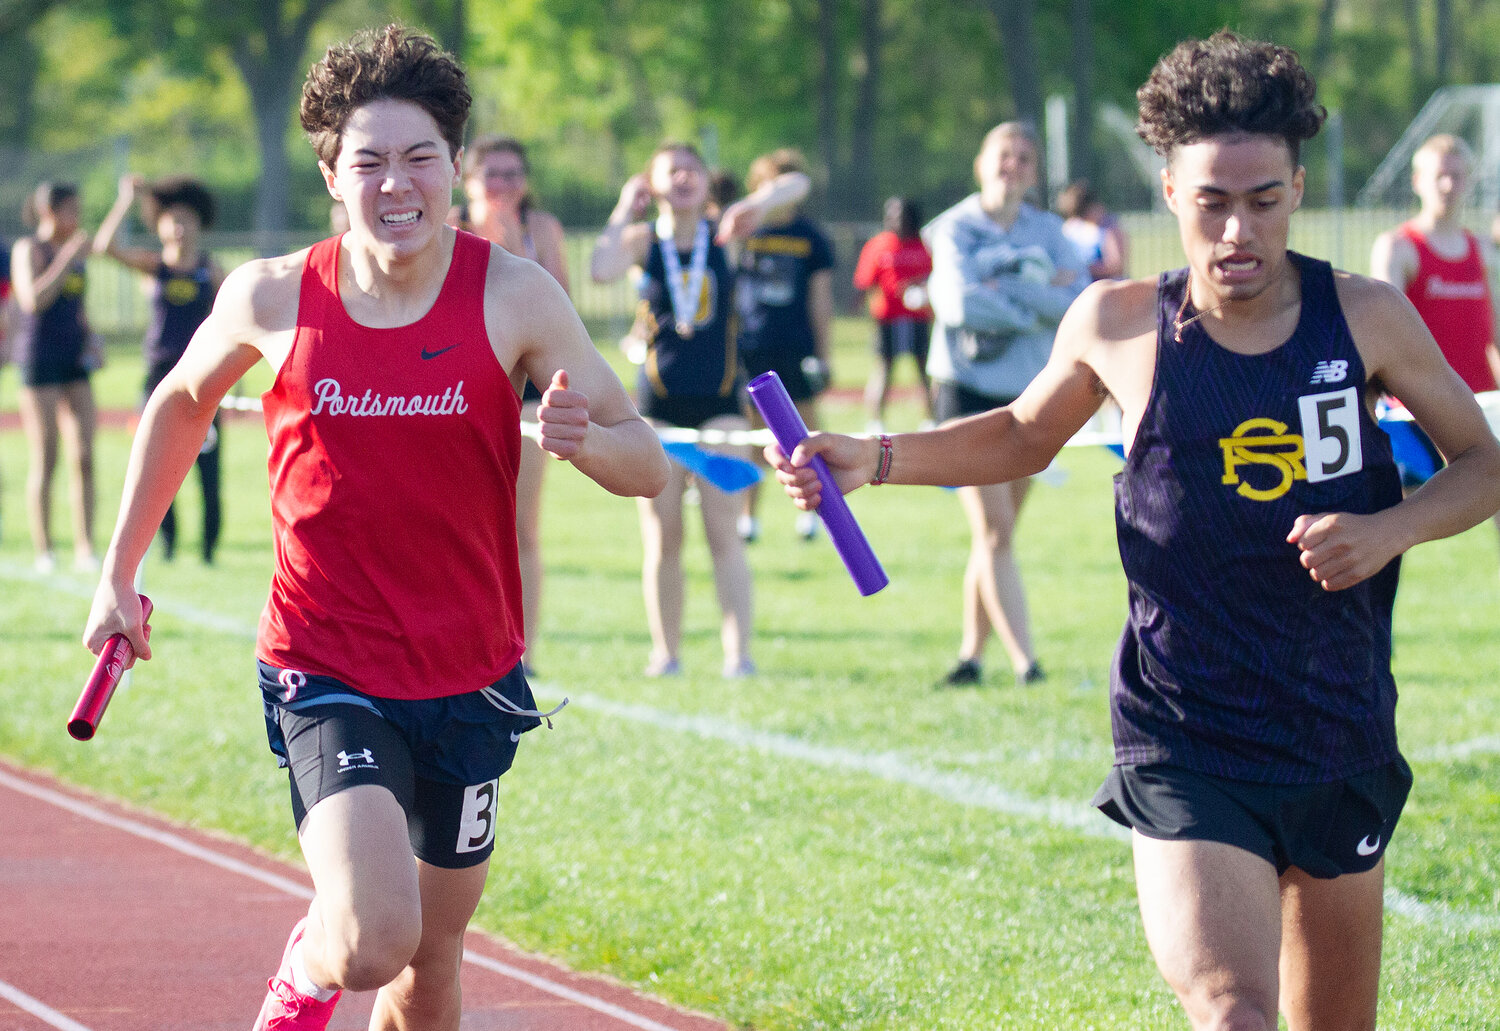 Portsmouth High’s Aidan Chen nearly caught the best runner in the state, Devan Kipyego of St. Raphael Academy, in the 4x400-meter relay race during the Eastern Division track and field championships over the weekend. The PHS team ended up taking second place.